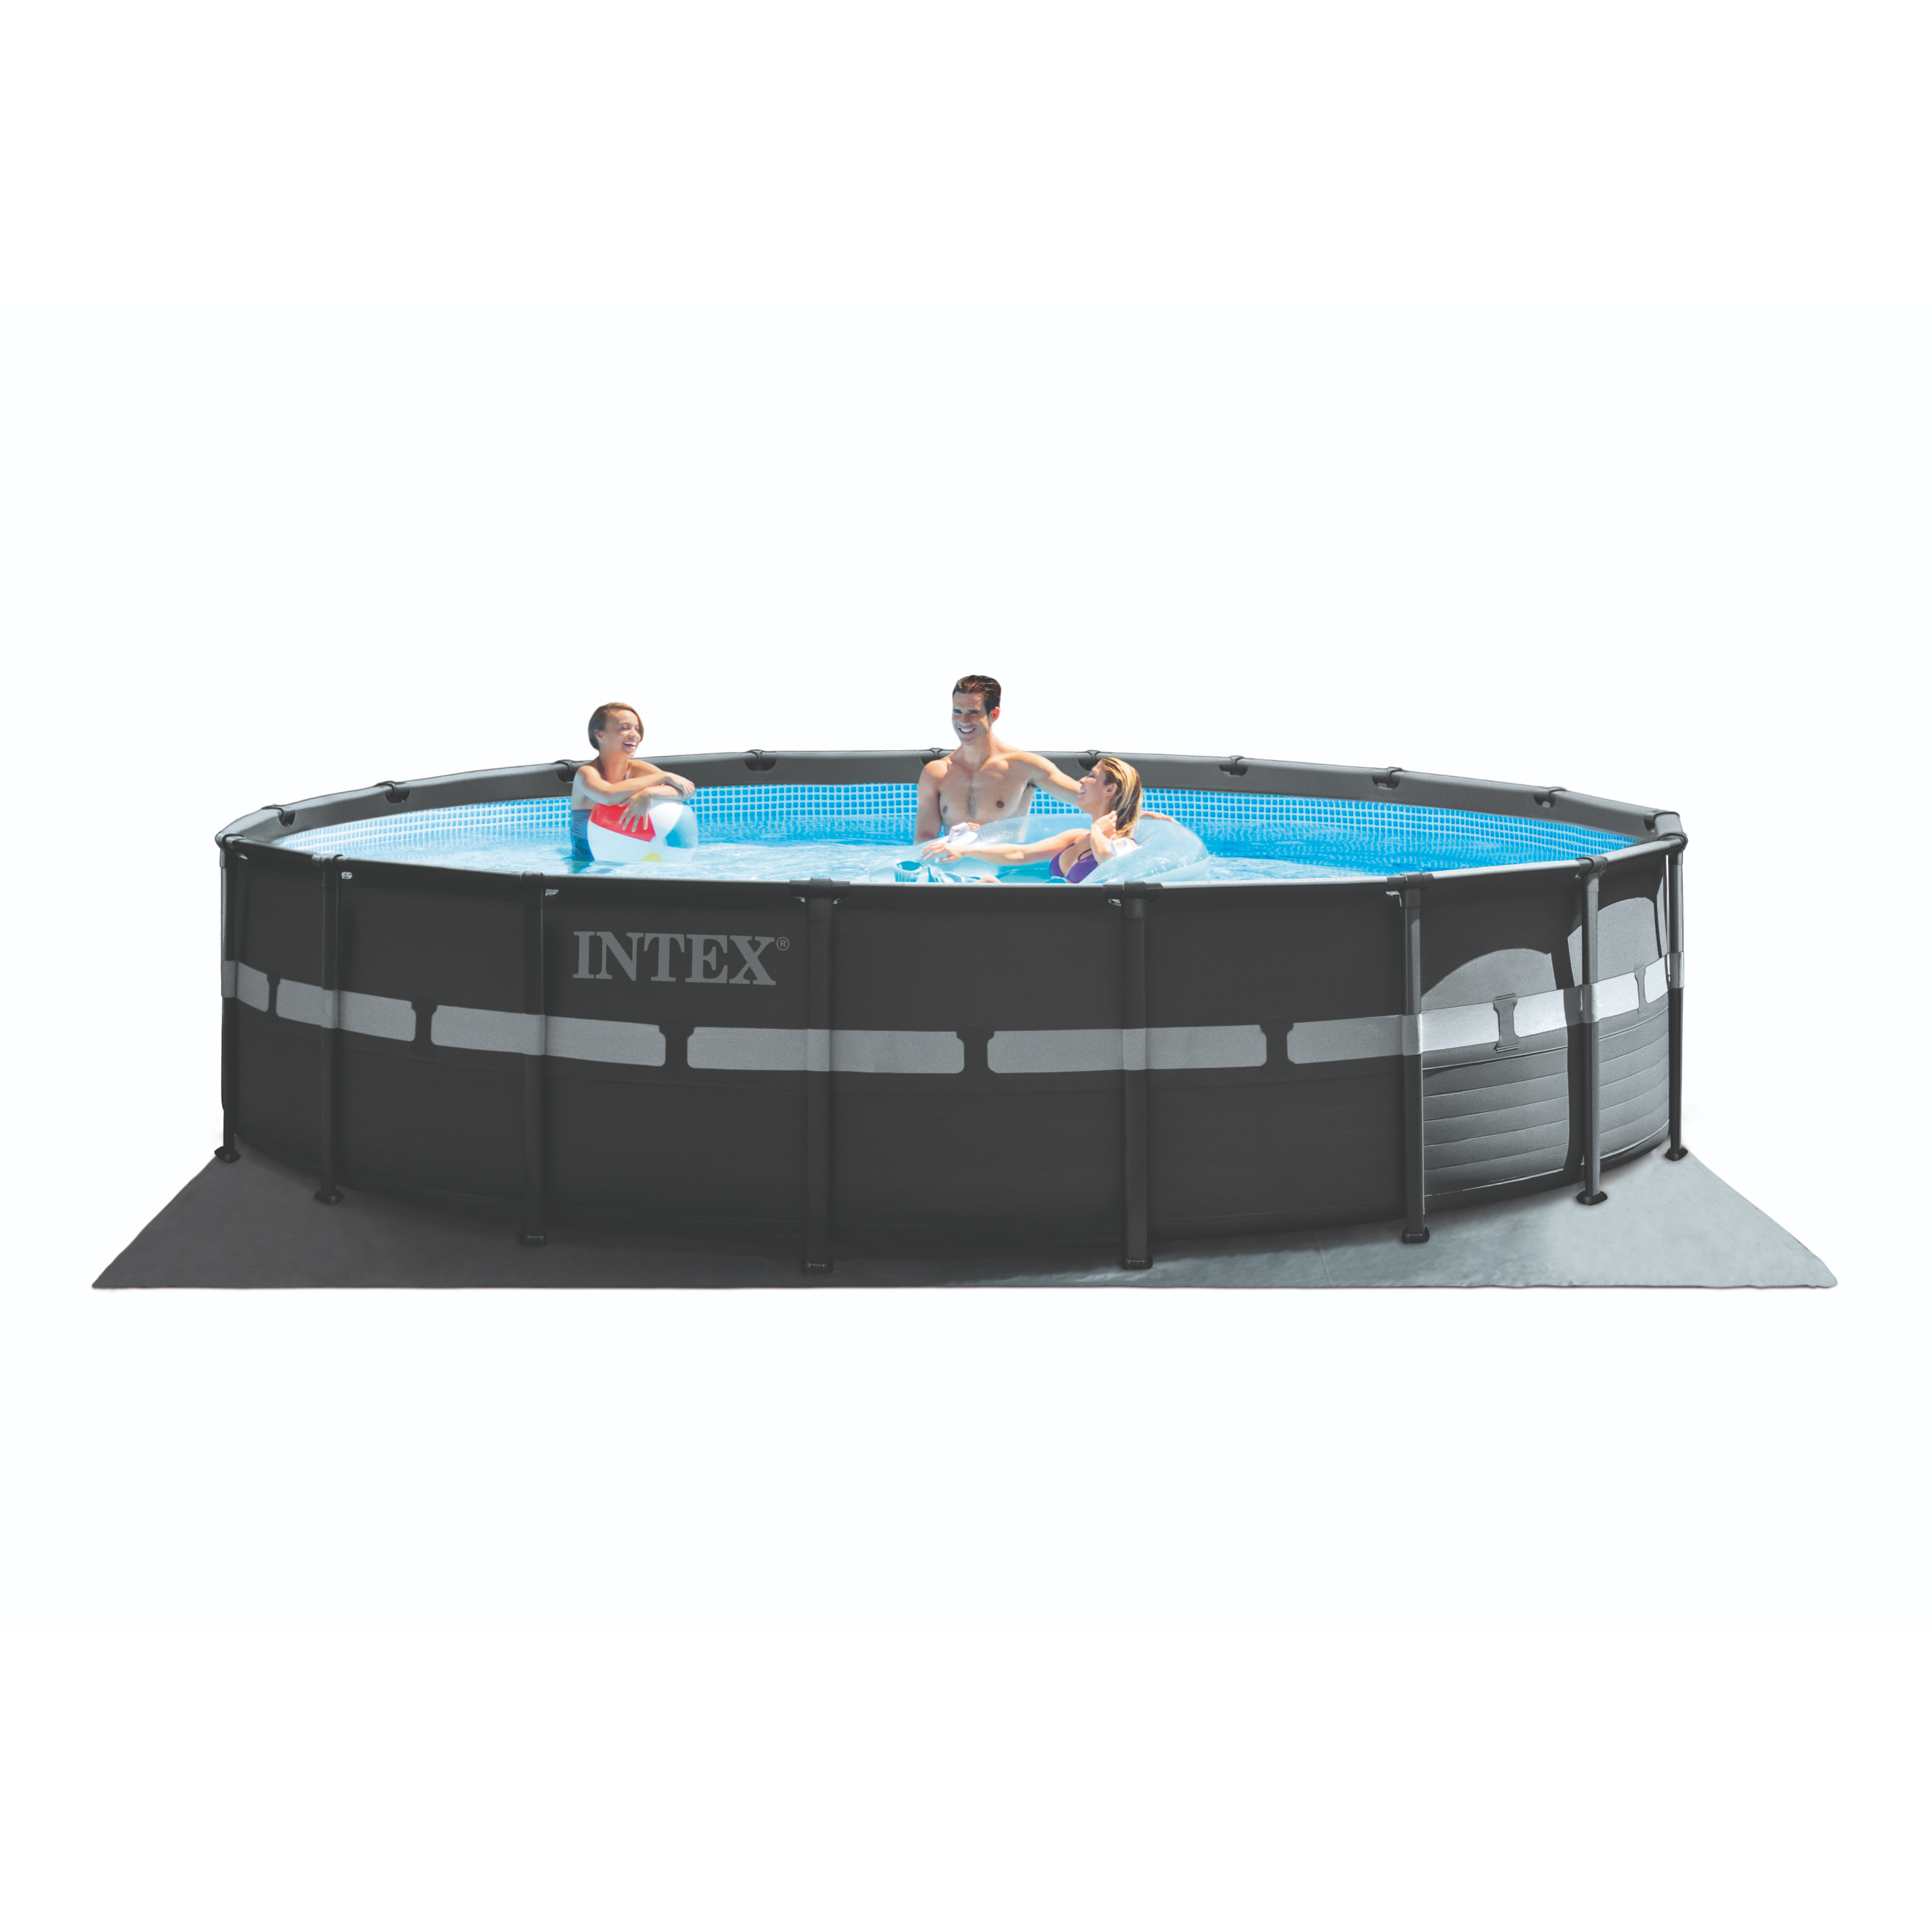 Intex 18Ft x 52In Ultra XTR Frame Round Above Ground Swimming Pool Set with Pump - image 5 of 12